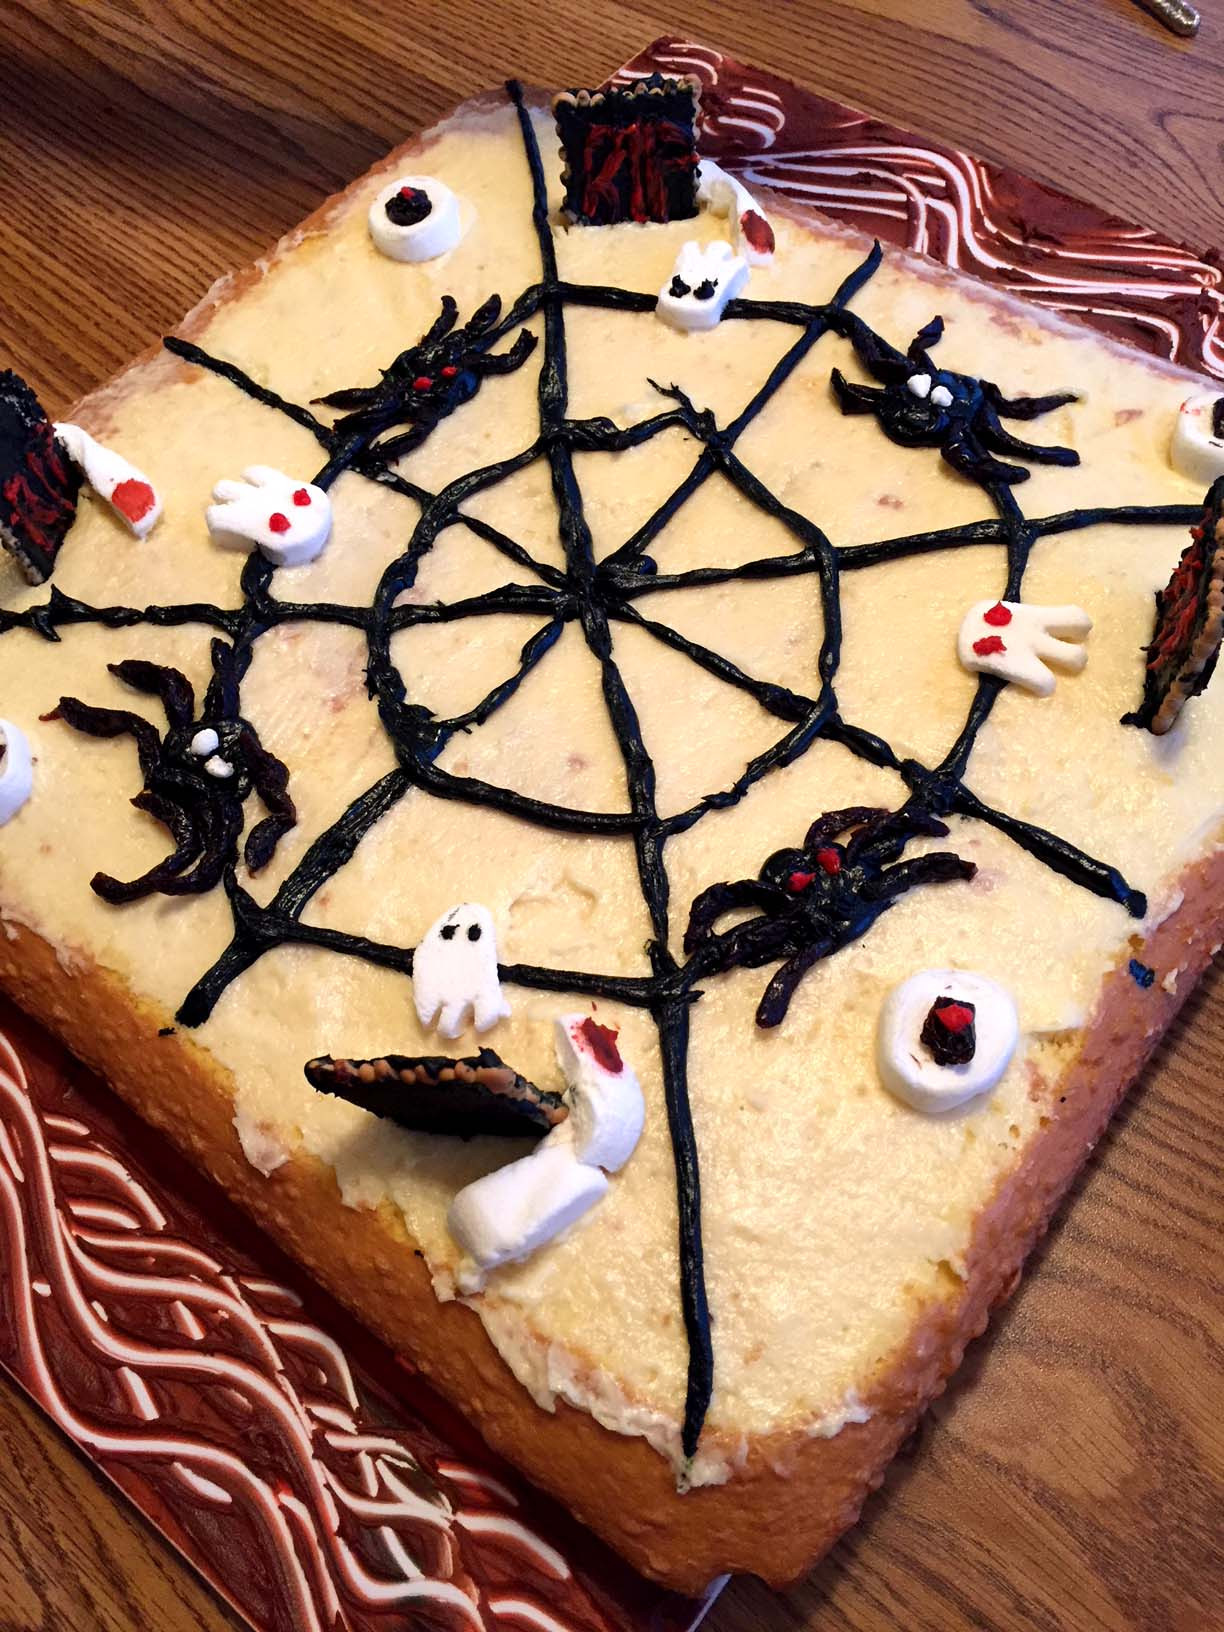 Halloween Cakes Decorations Ideas
 Easy Halloween Cake Decorating Ideas For Spooky Cake